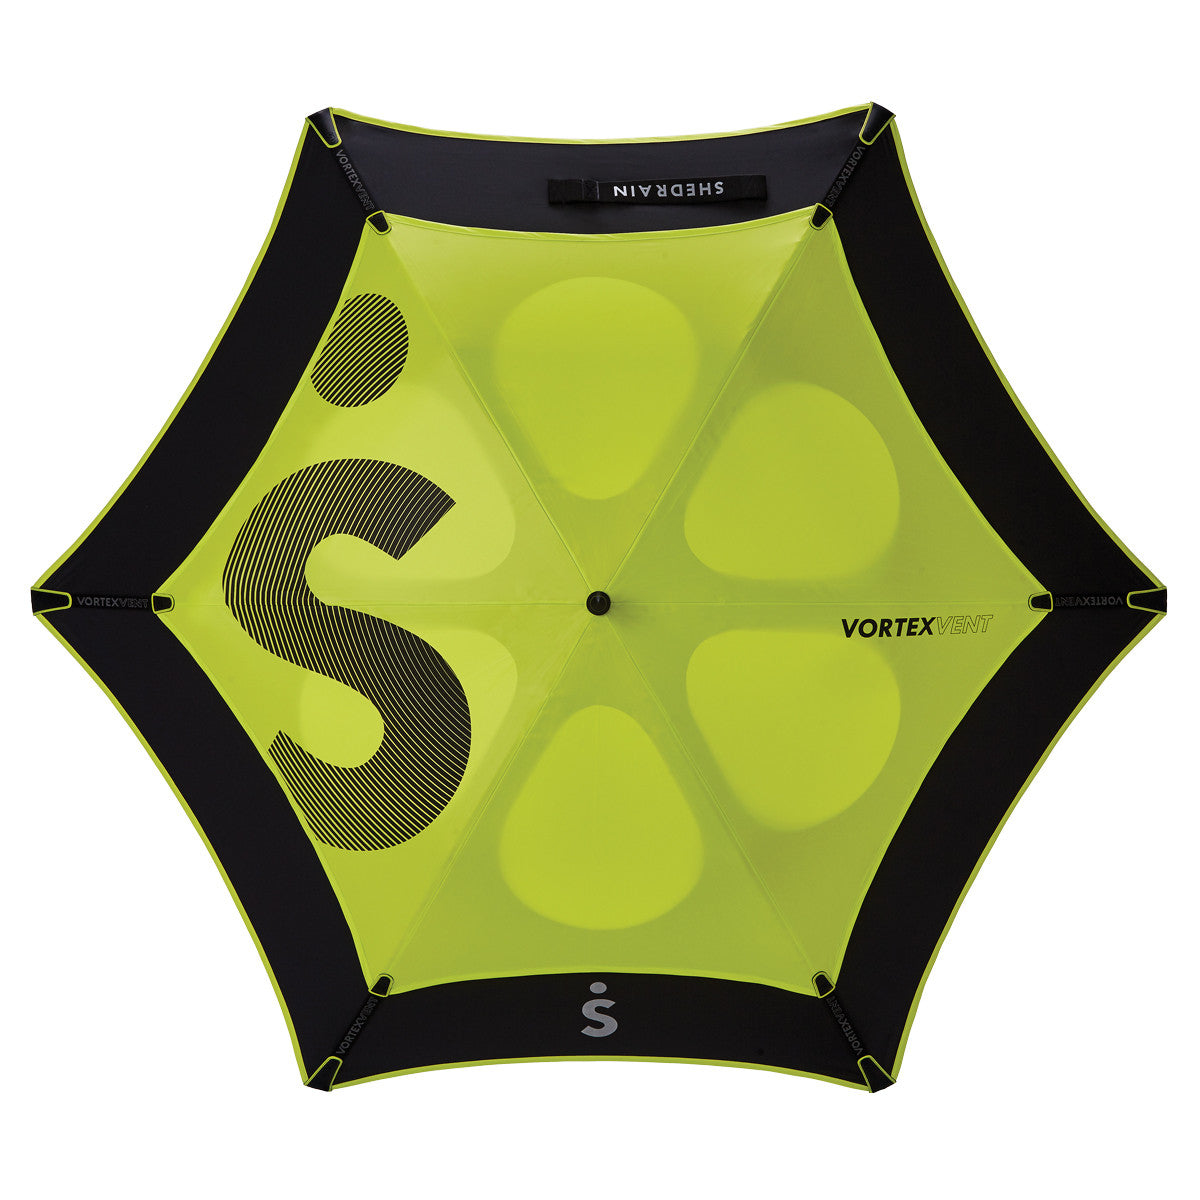 bright lime green and black vented double canopy wind-resistant three person golf umbrella with fiberglass frame and rubber grip, viewed from above with very large letter S logo